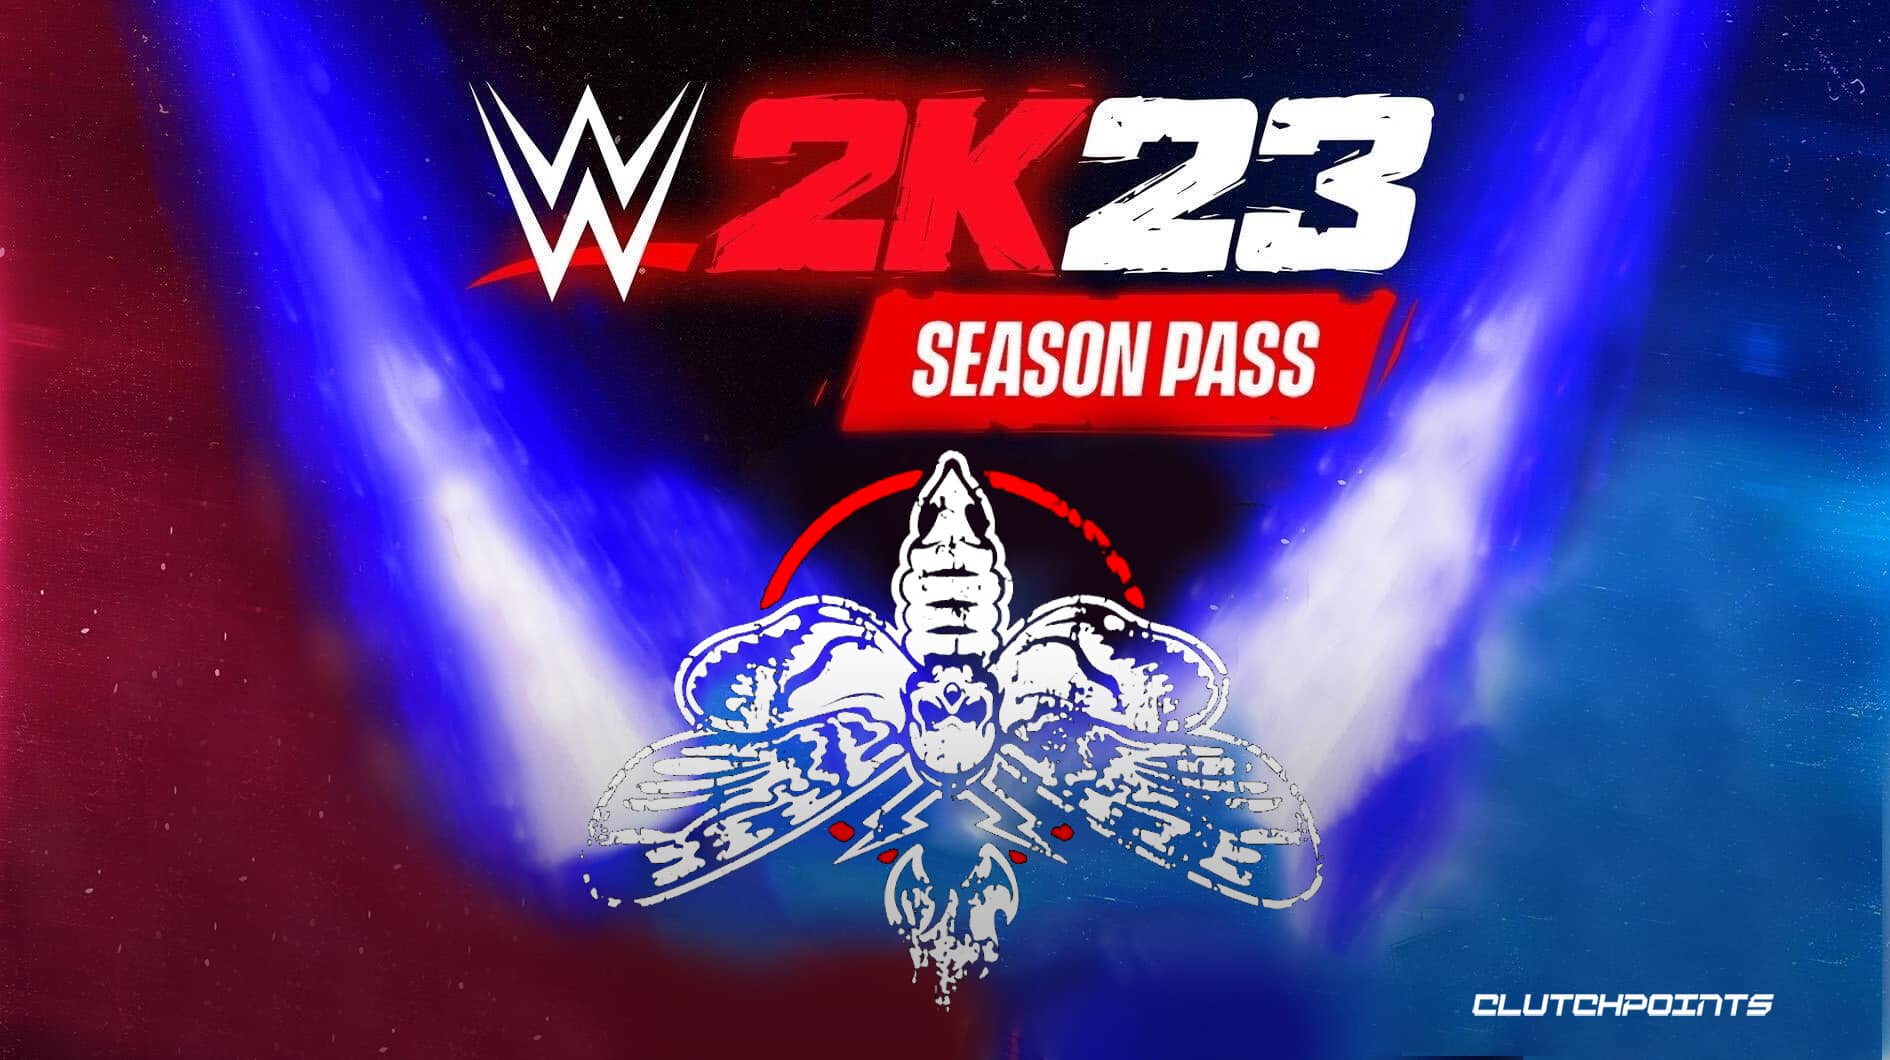 Say “Howdy” to the WWE® 2K23 Revel with Wyatt Pack